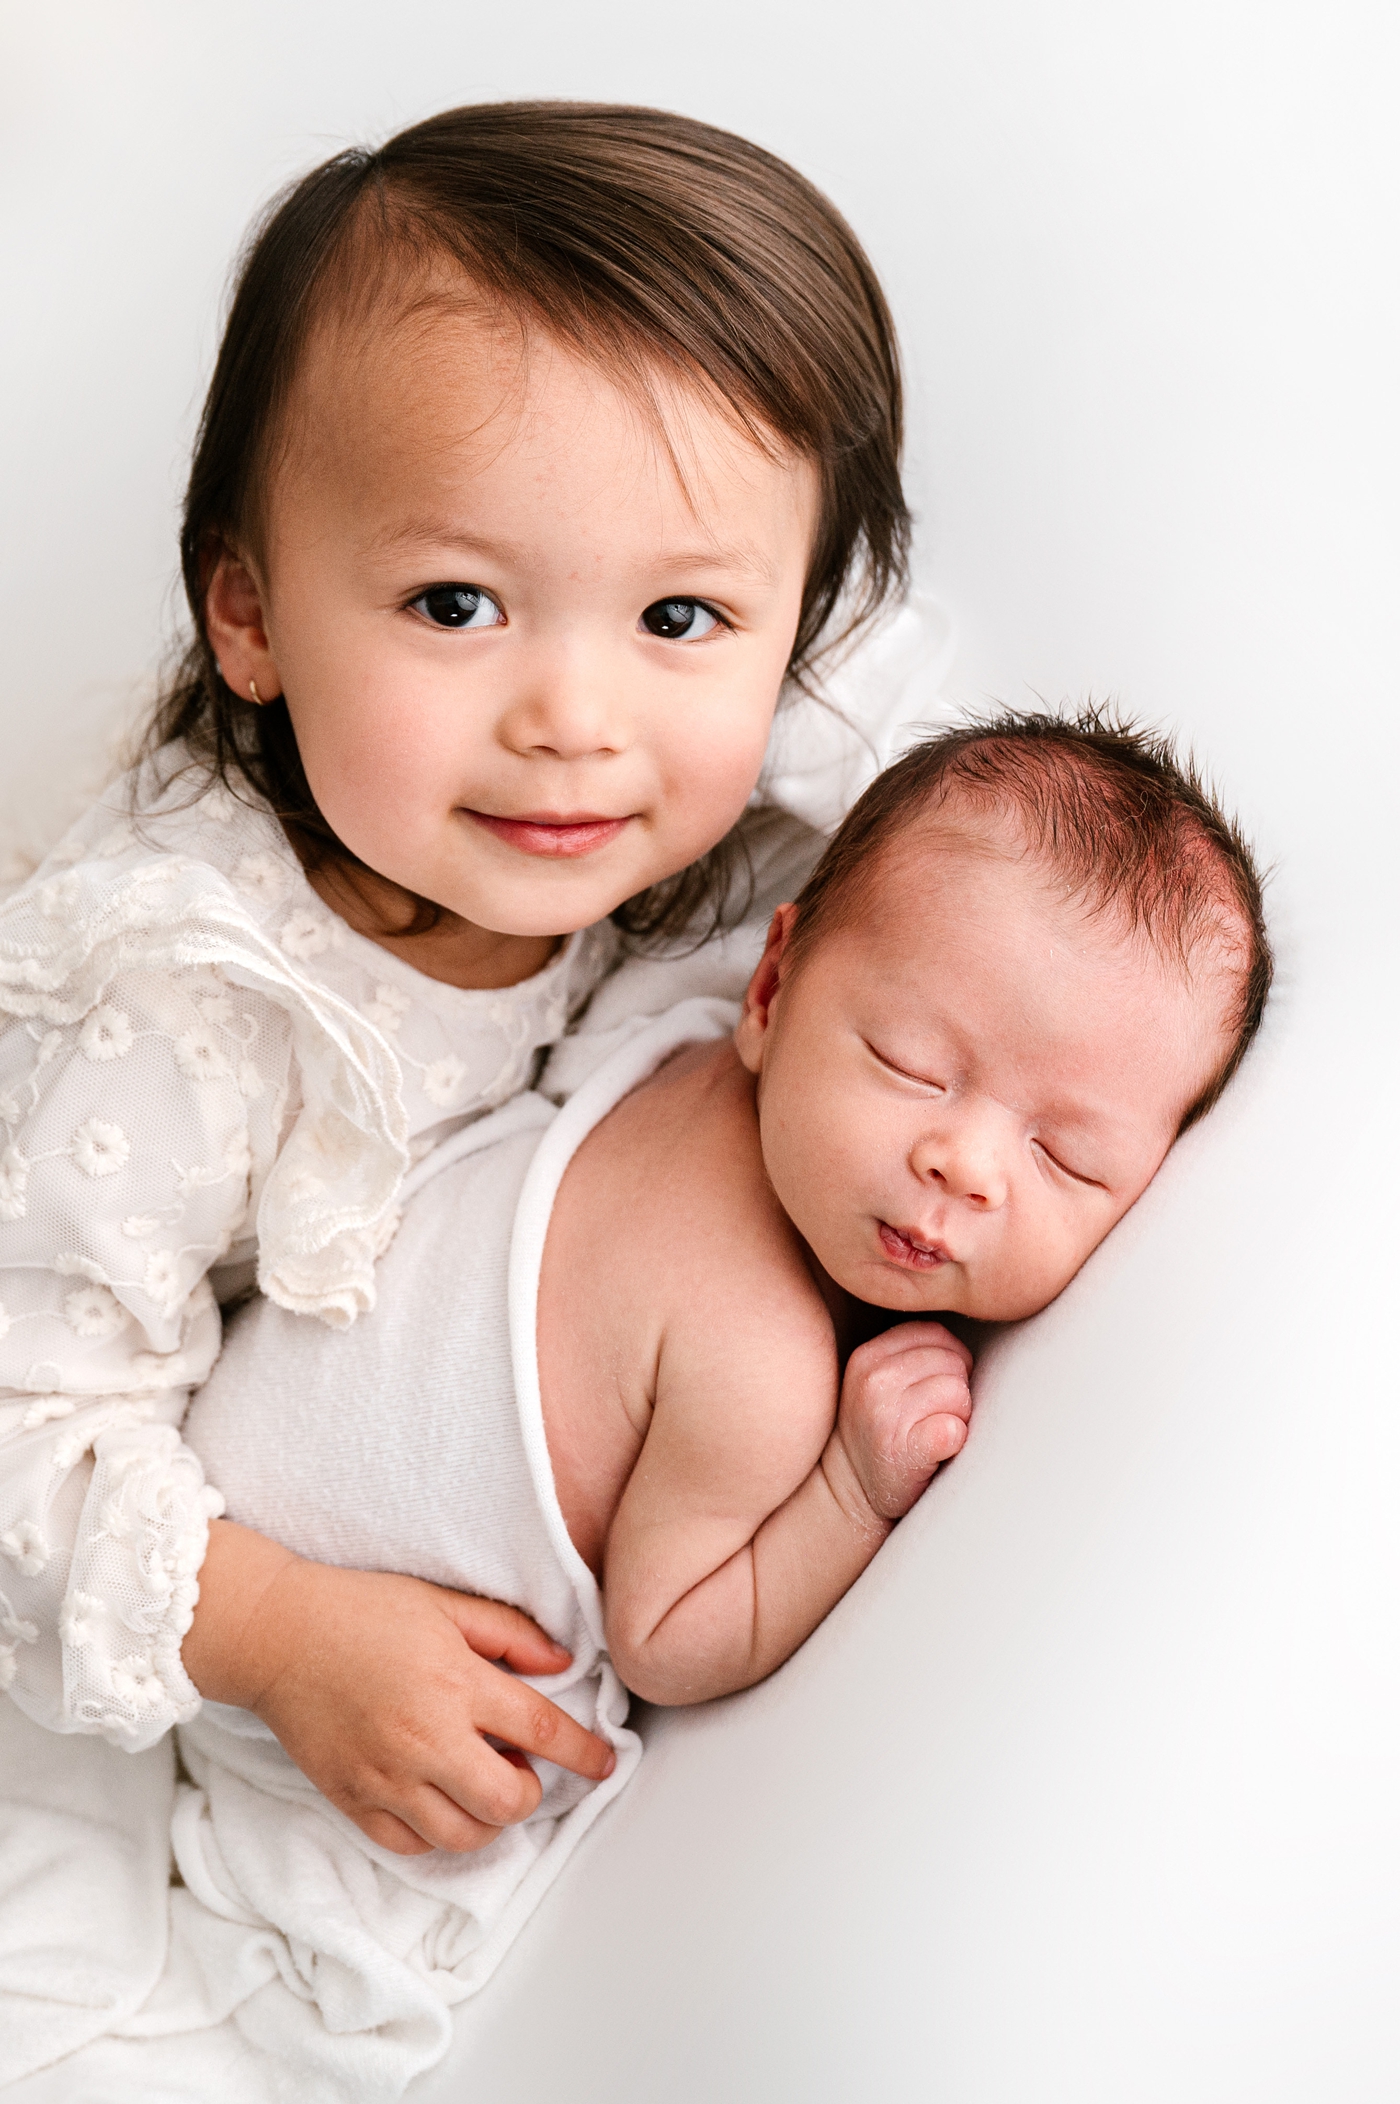 Older sister proudly holds her new little brother in Tacoma studio session. Photo by Meg Newton Photography.